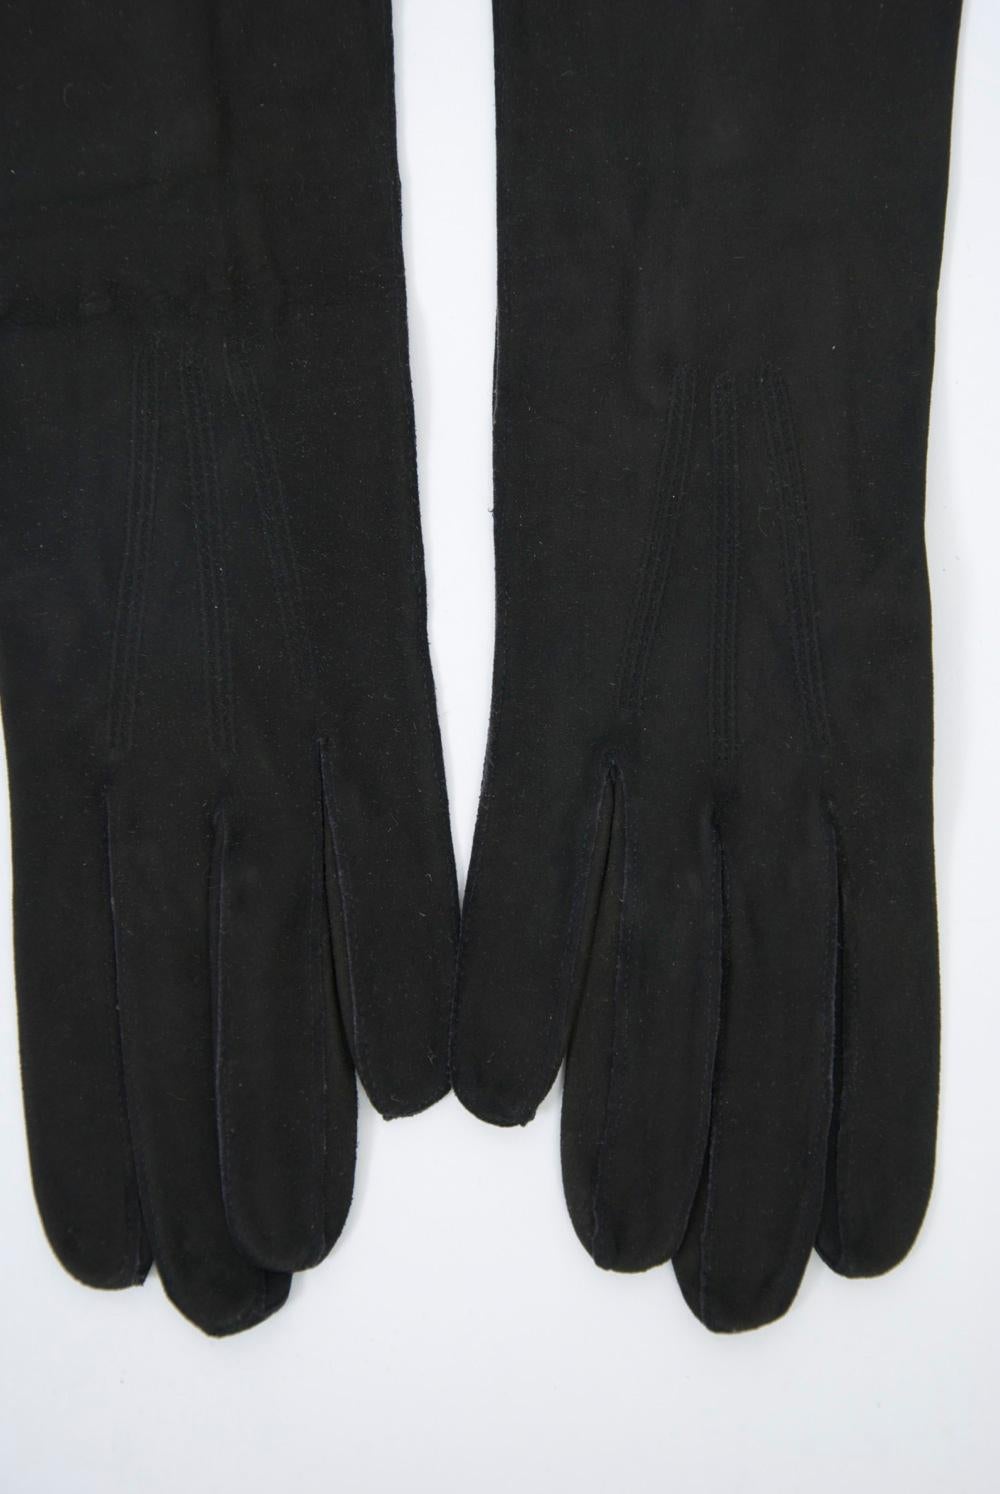 Long black opera gloves in French kid featuring a three-button opening on the wrist side.